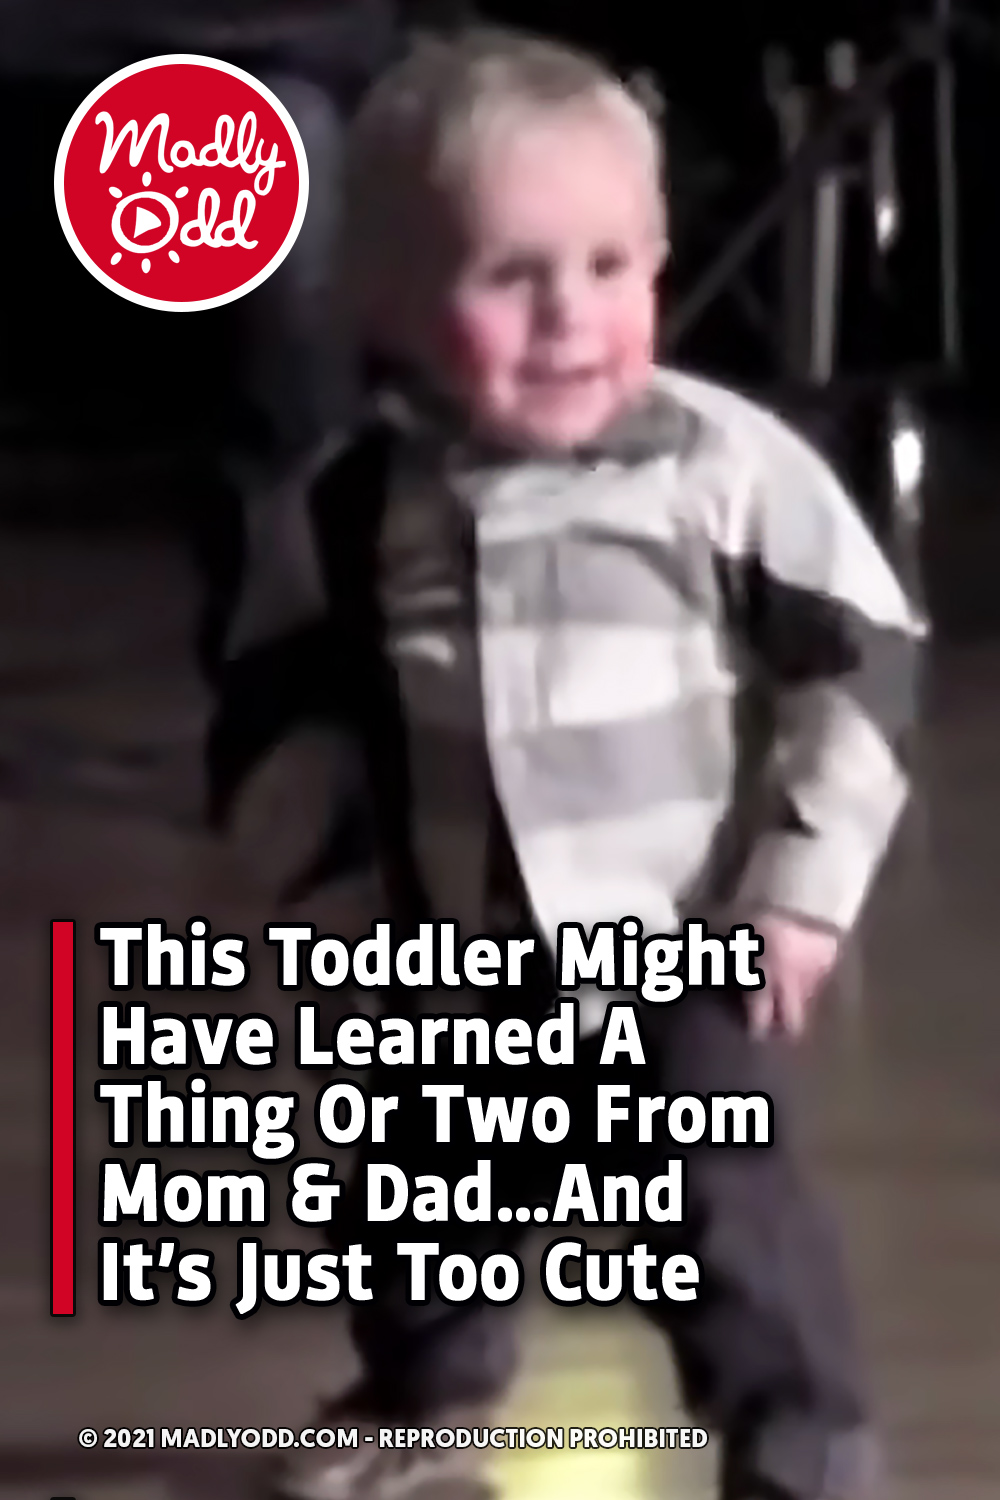 This Toddler Might Have Learned A Thing Or Two From Mom & Dad...And It’s Just Too Cute